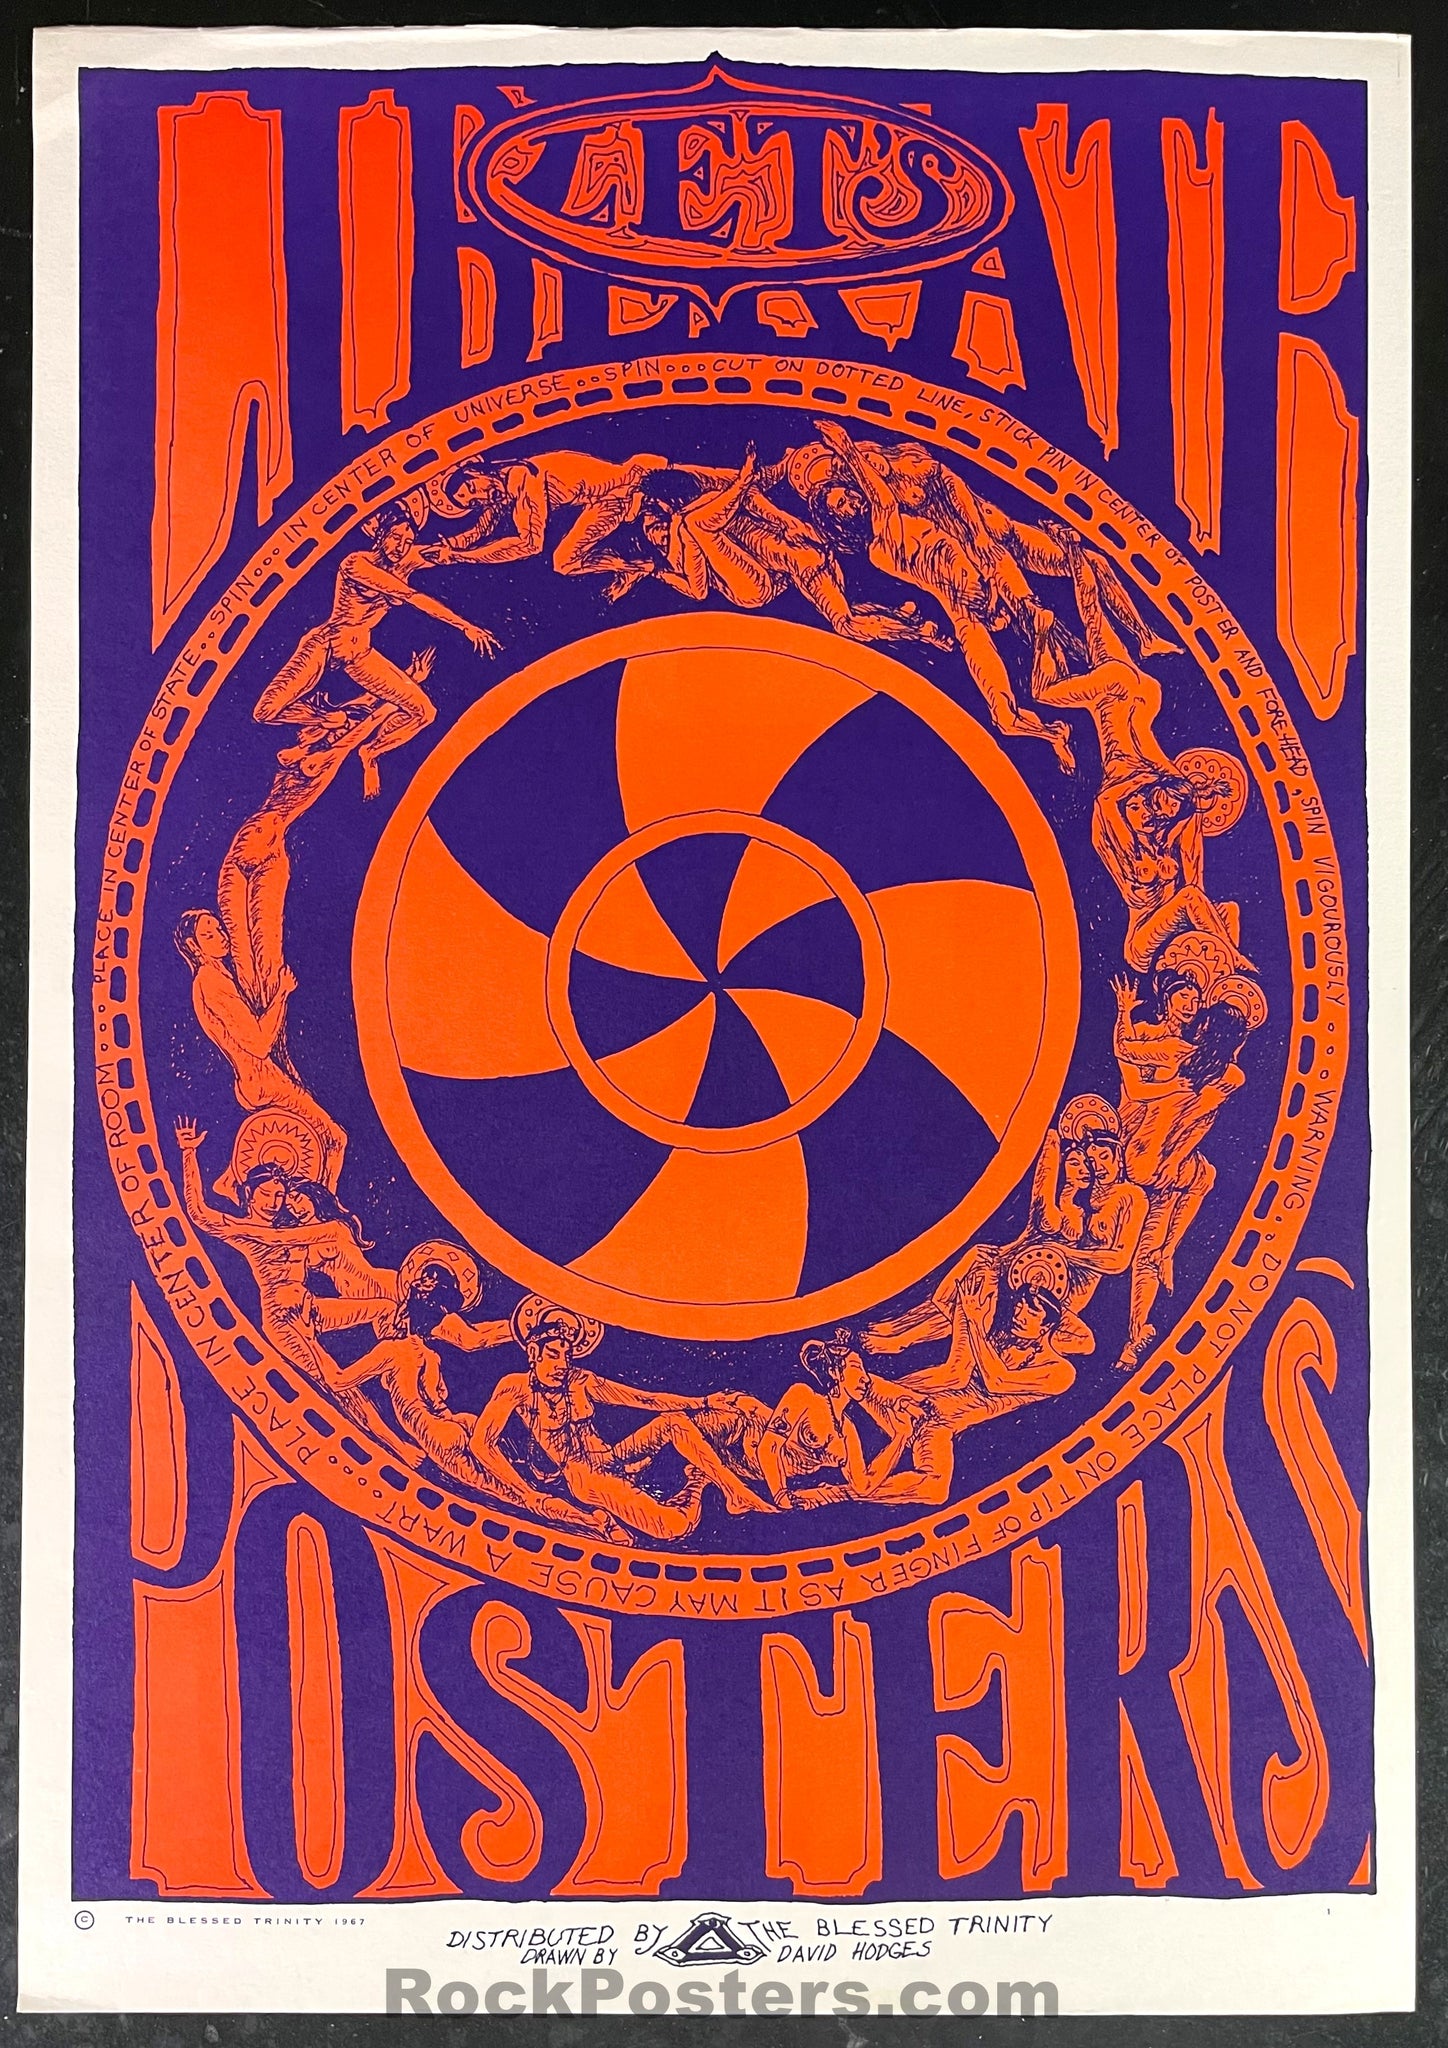 AUCTION - Let's Liberate Posters - 1967 Headshop Poster - Near Mint Minus